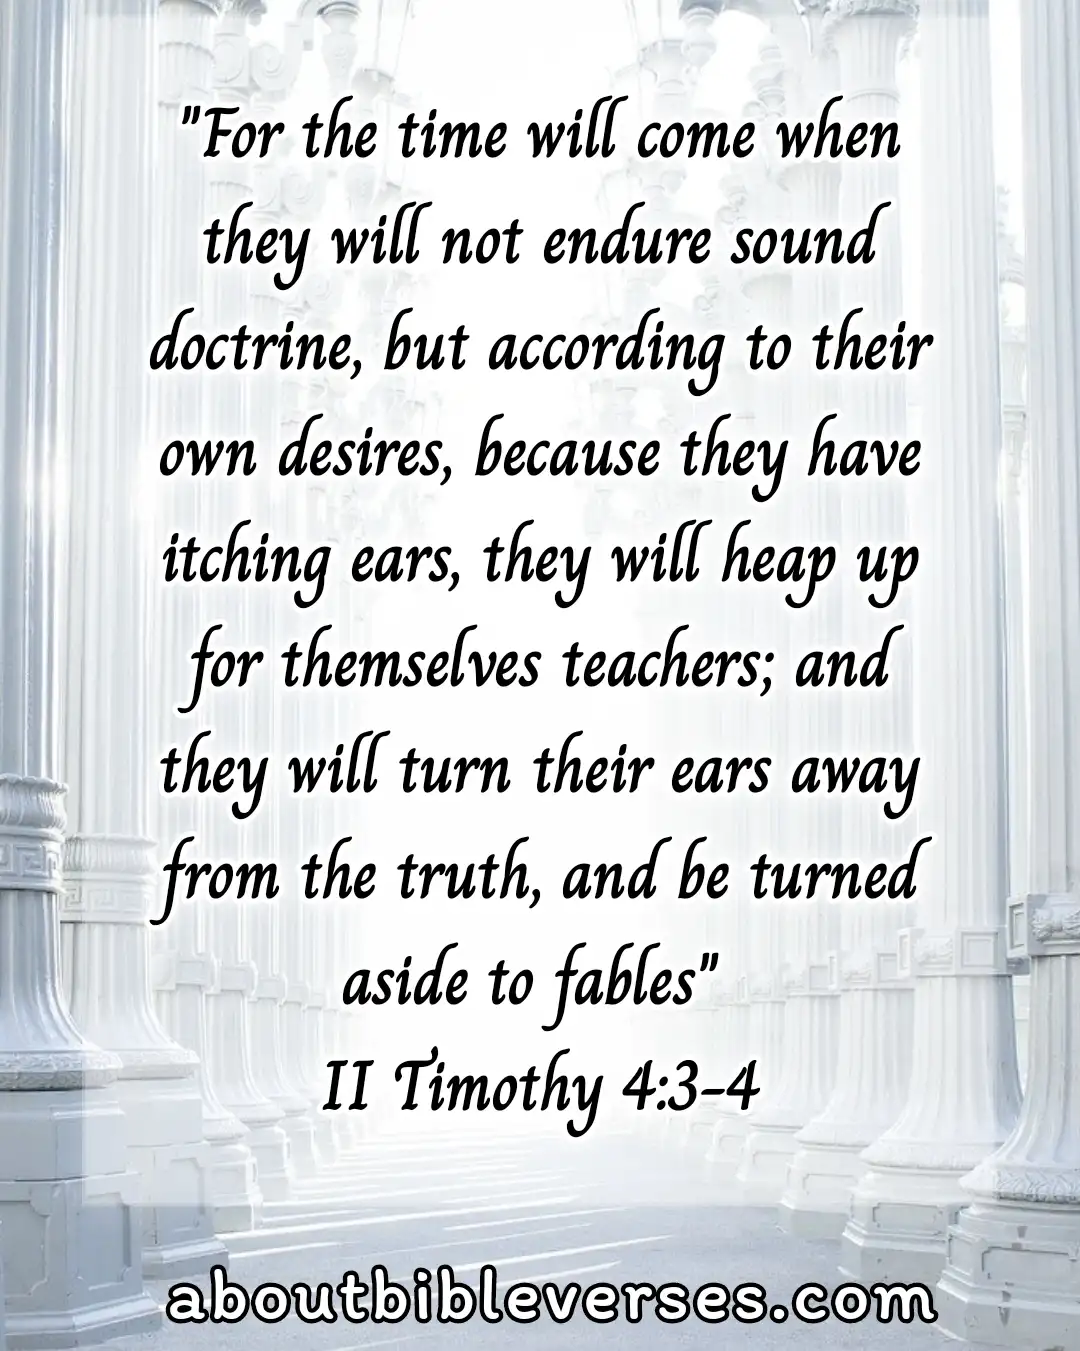 bible verse about deception in the last days (2 Timothy 4:3-4)